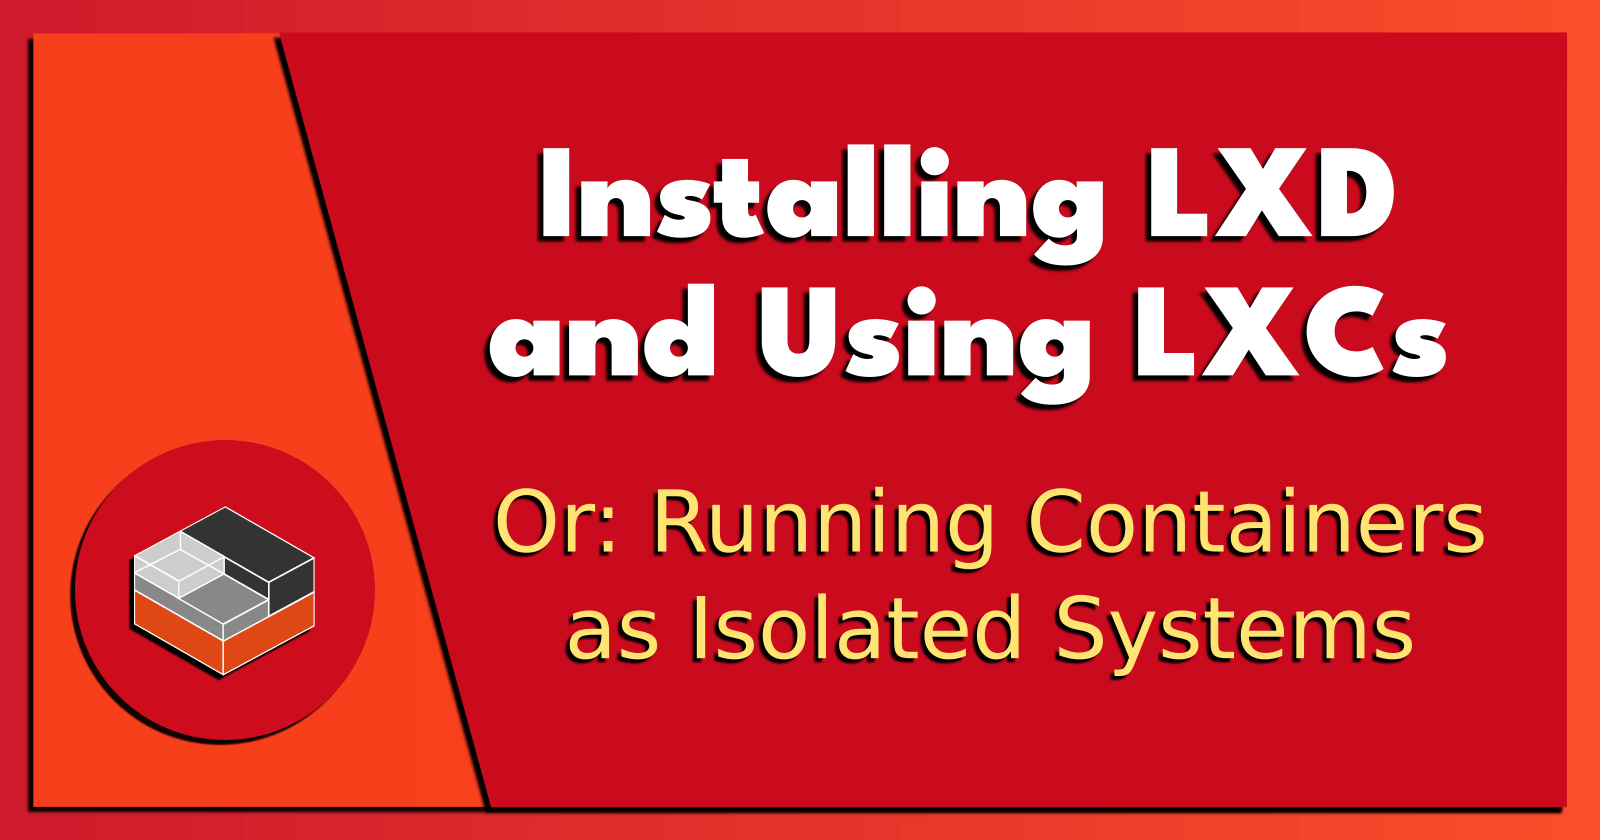 Installing LXD and Using LXCs.